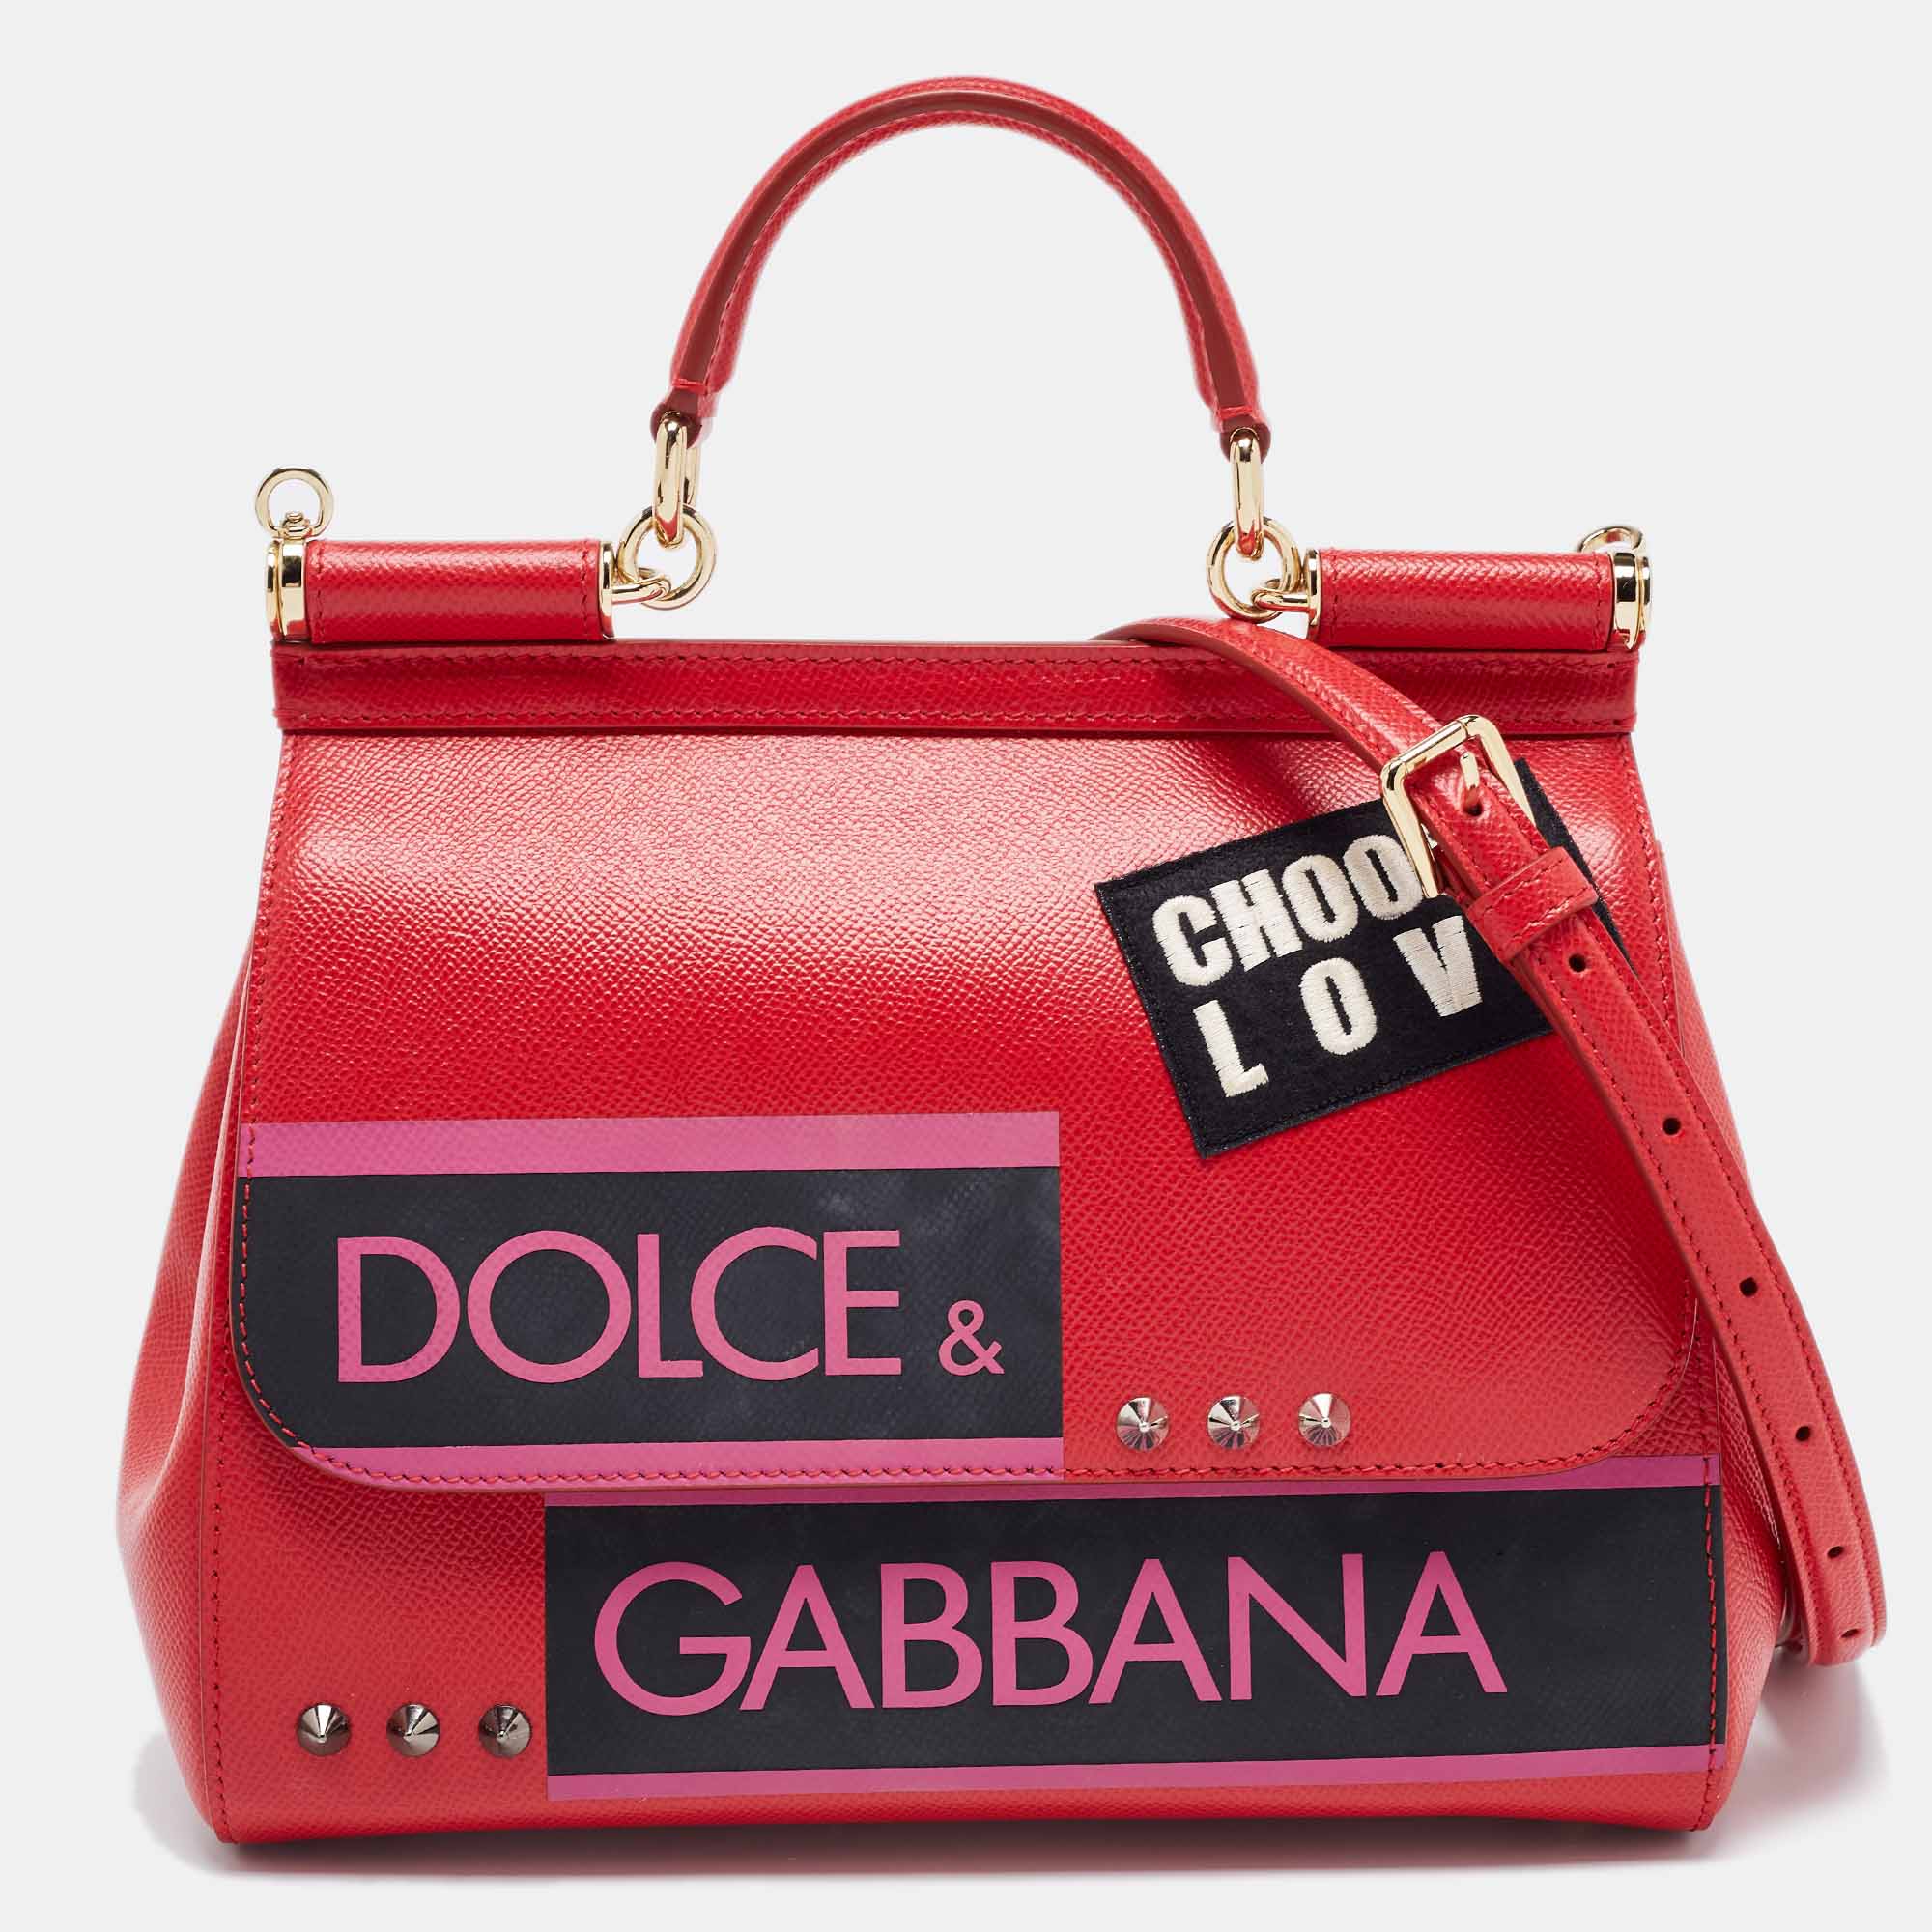 Pre-owned Dolce & Gabbana Red Leather Medium Miss Sicily Choose Love Top Handle Bag